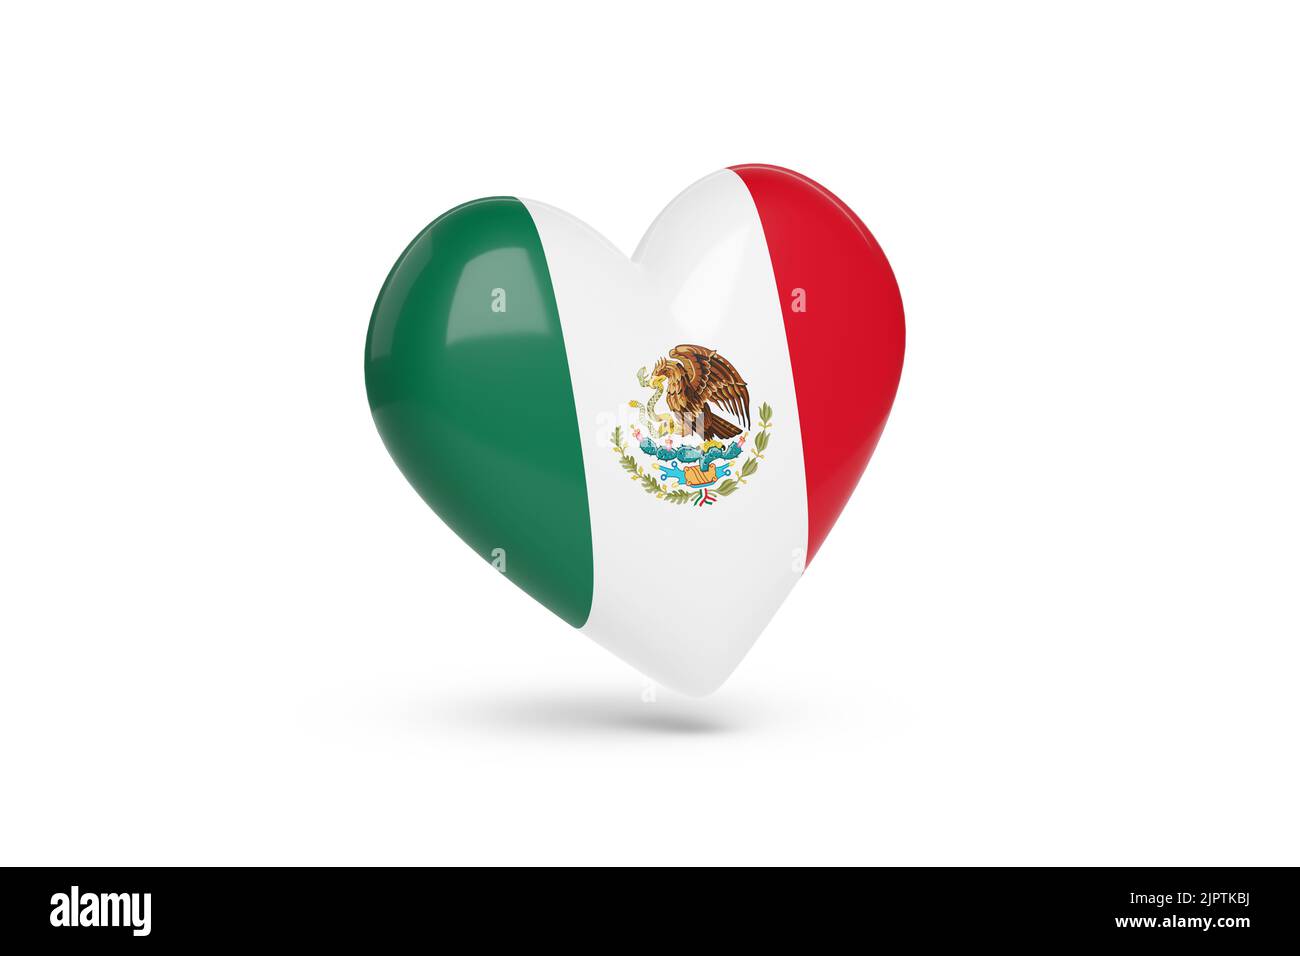 Heart with the colors of flag of Mexico isolated on white background. 3d illustration. Stock Photo